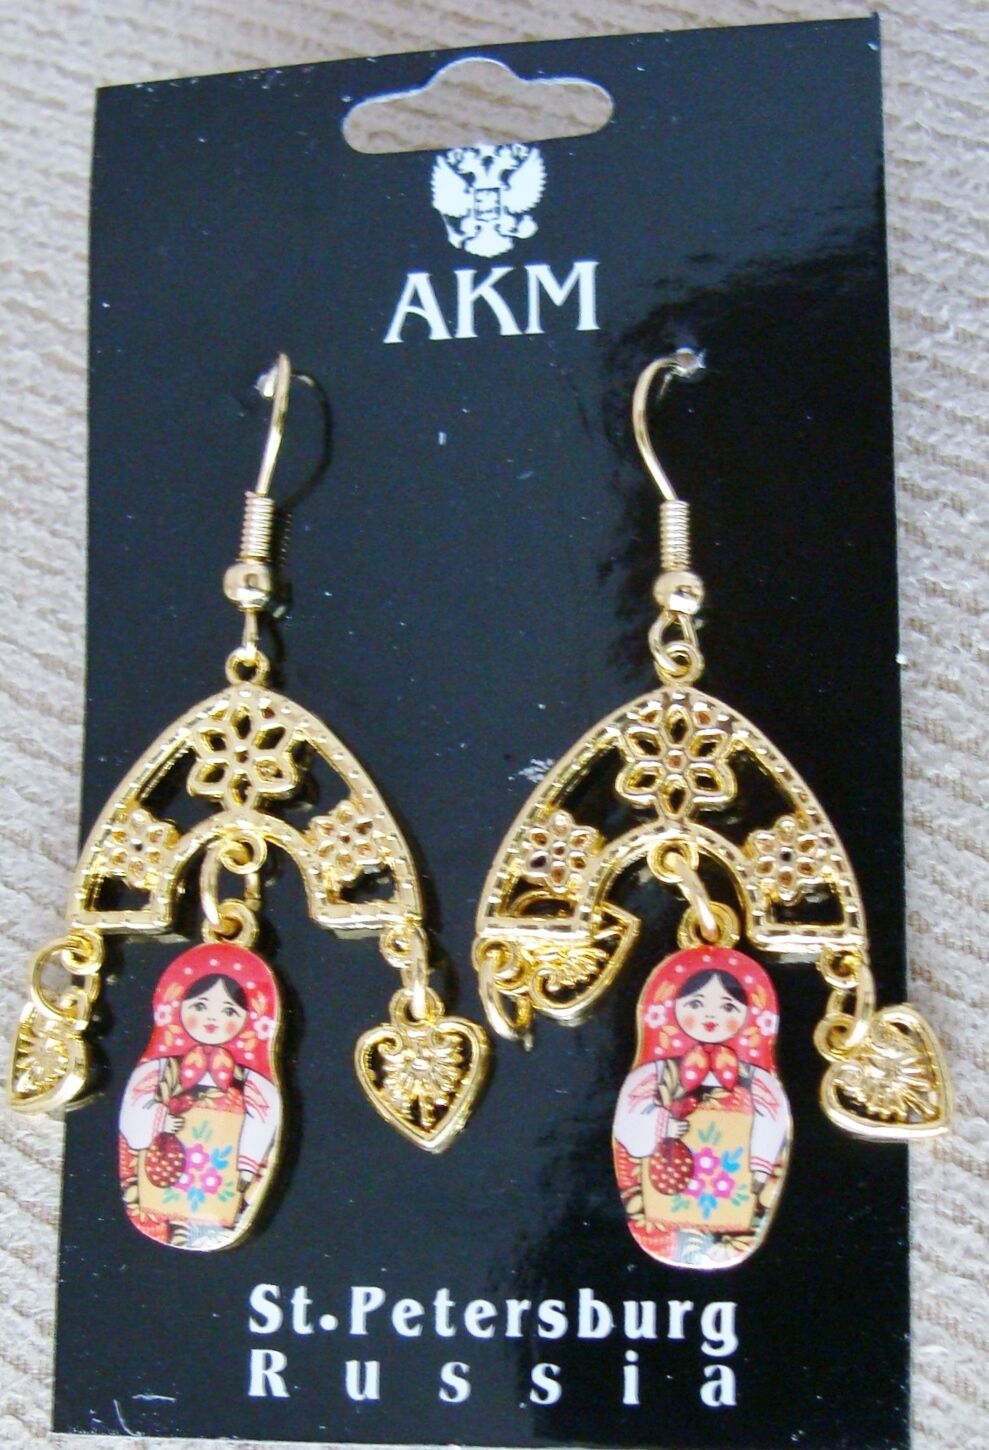 Russian traditional gold color metal earrings dolls old style. Made in St Peters